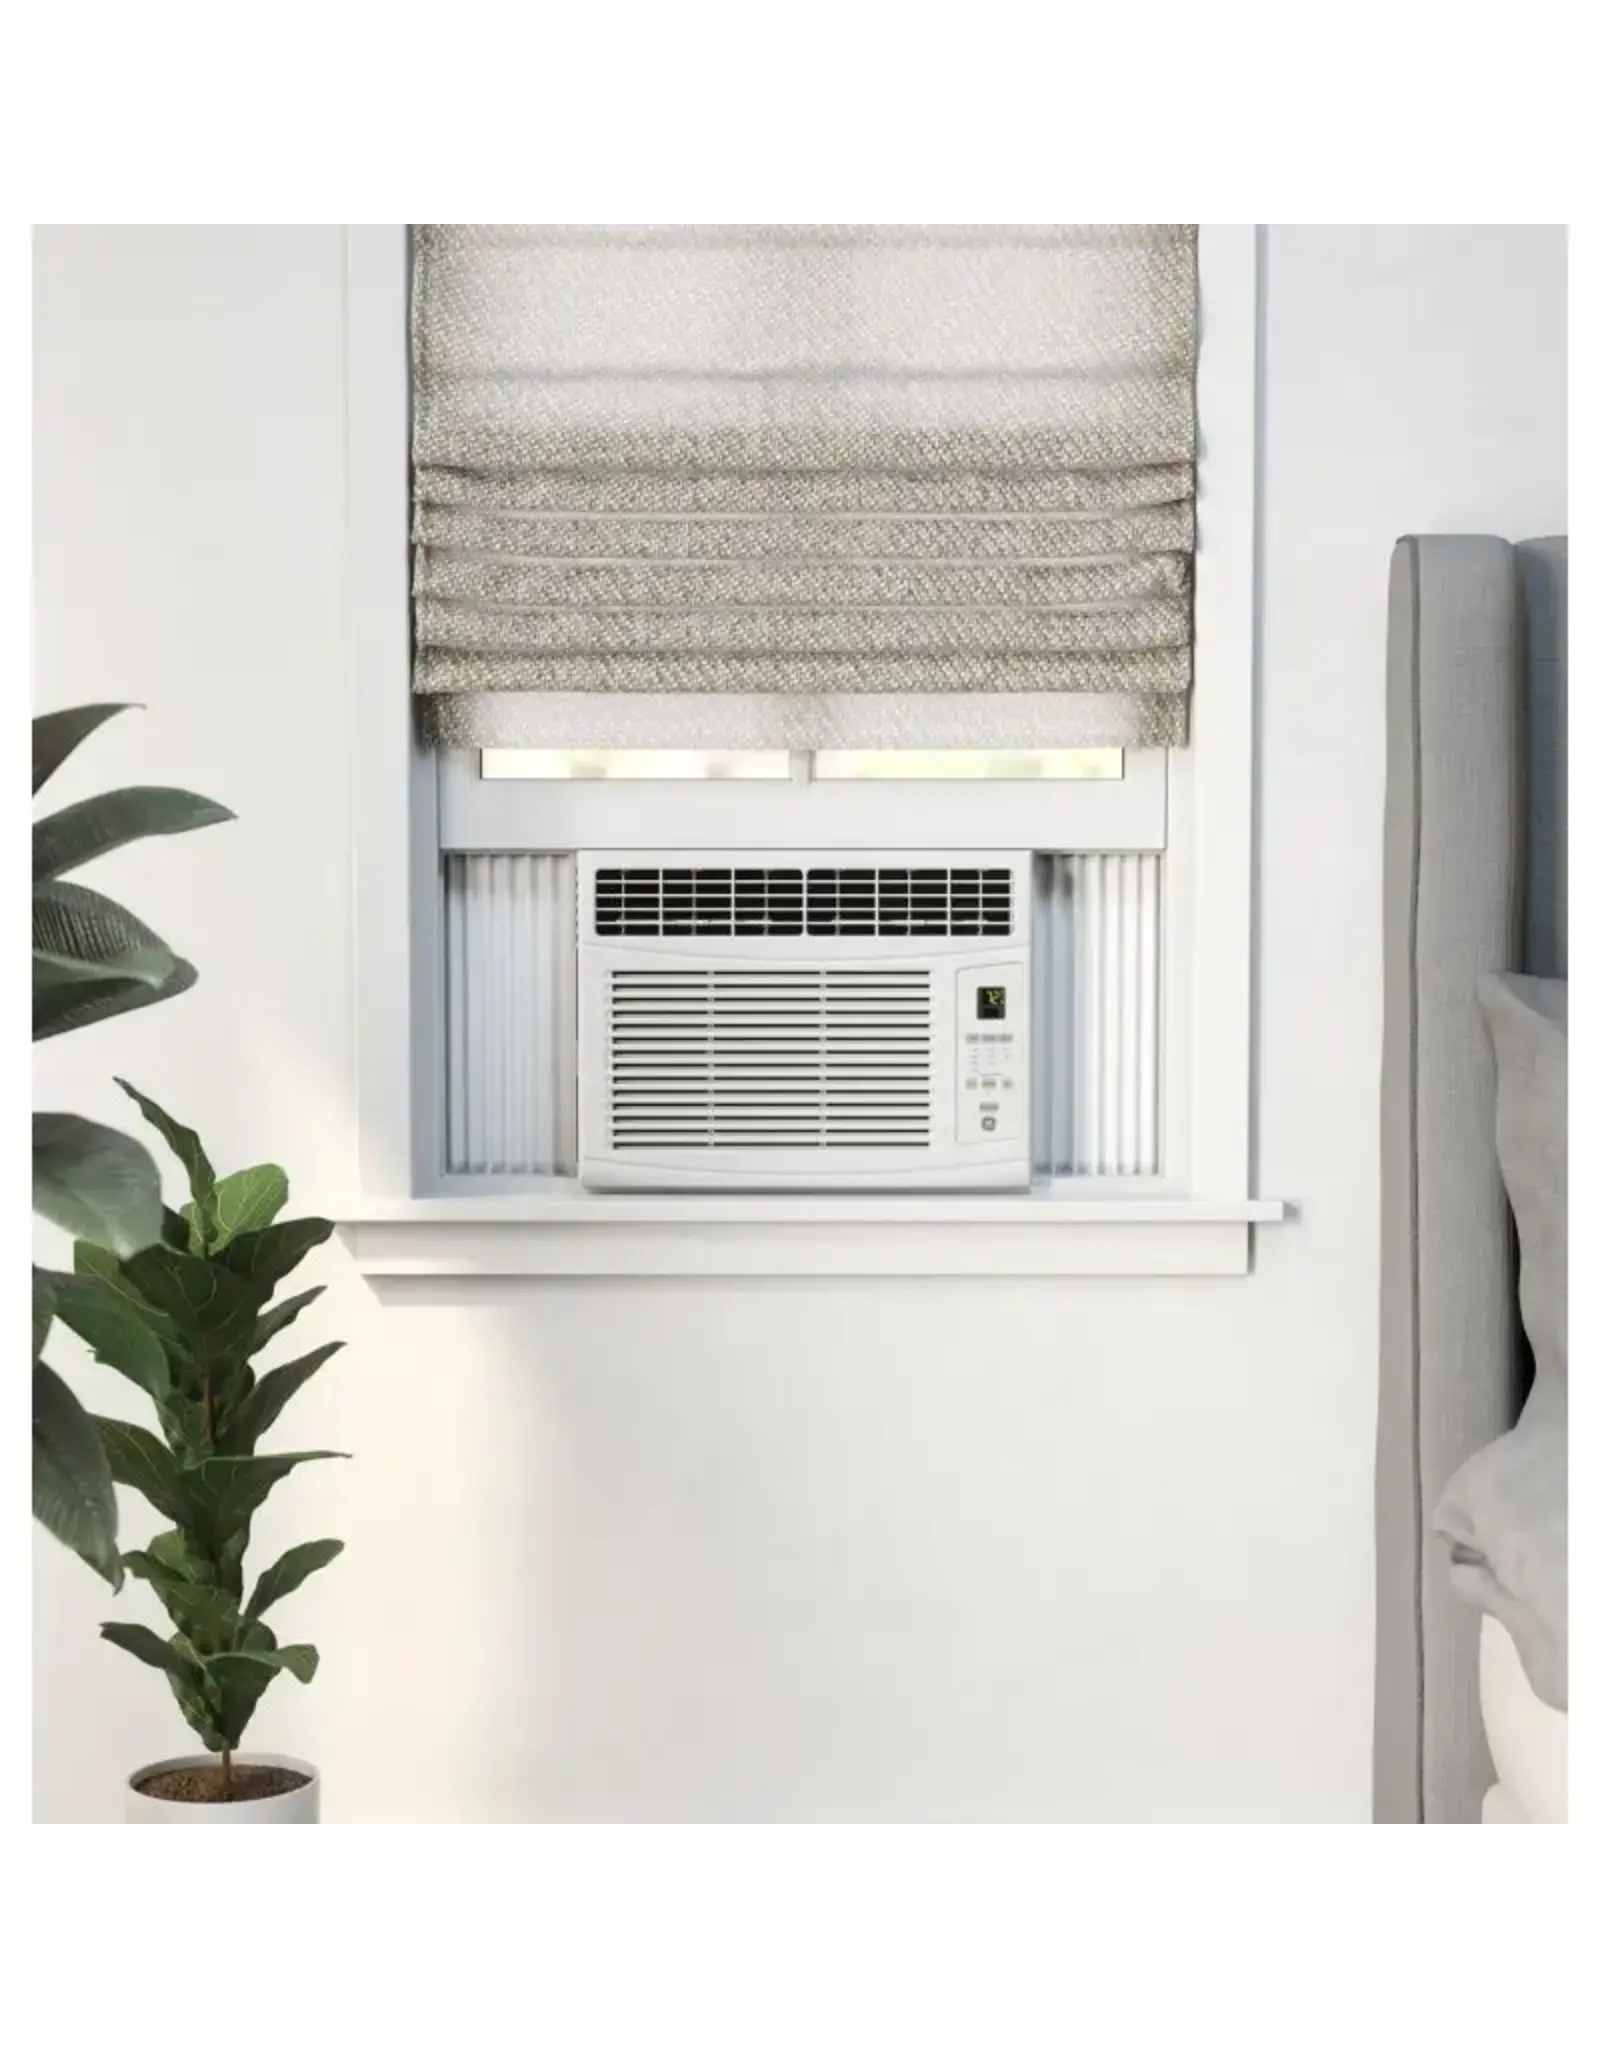 GE AHEE06AC-GE® 6,000 BTU Electronic Window Air Conditioner for Small Rooms up to 250 sq ft.